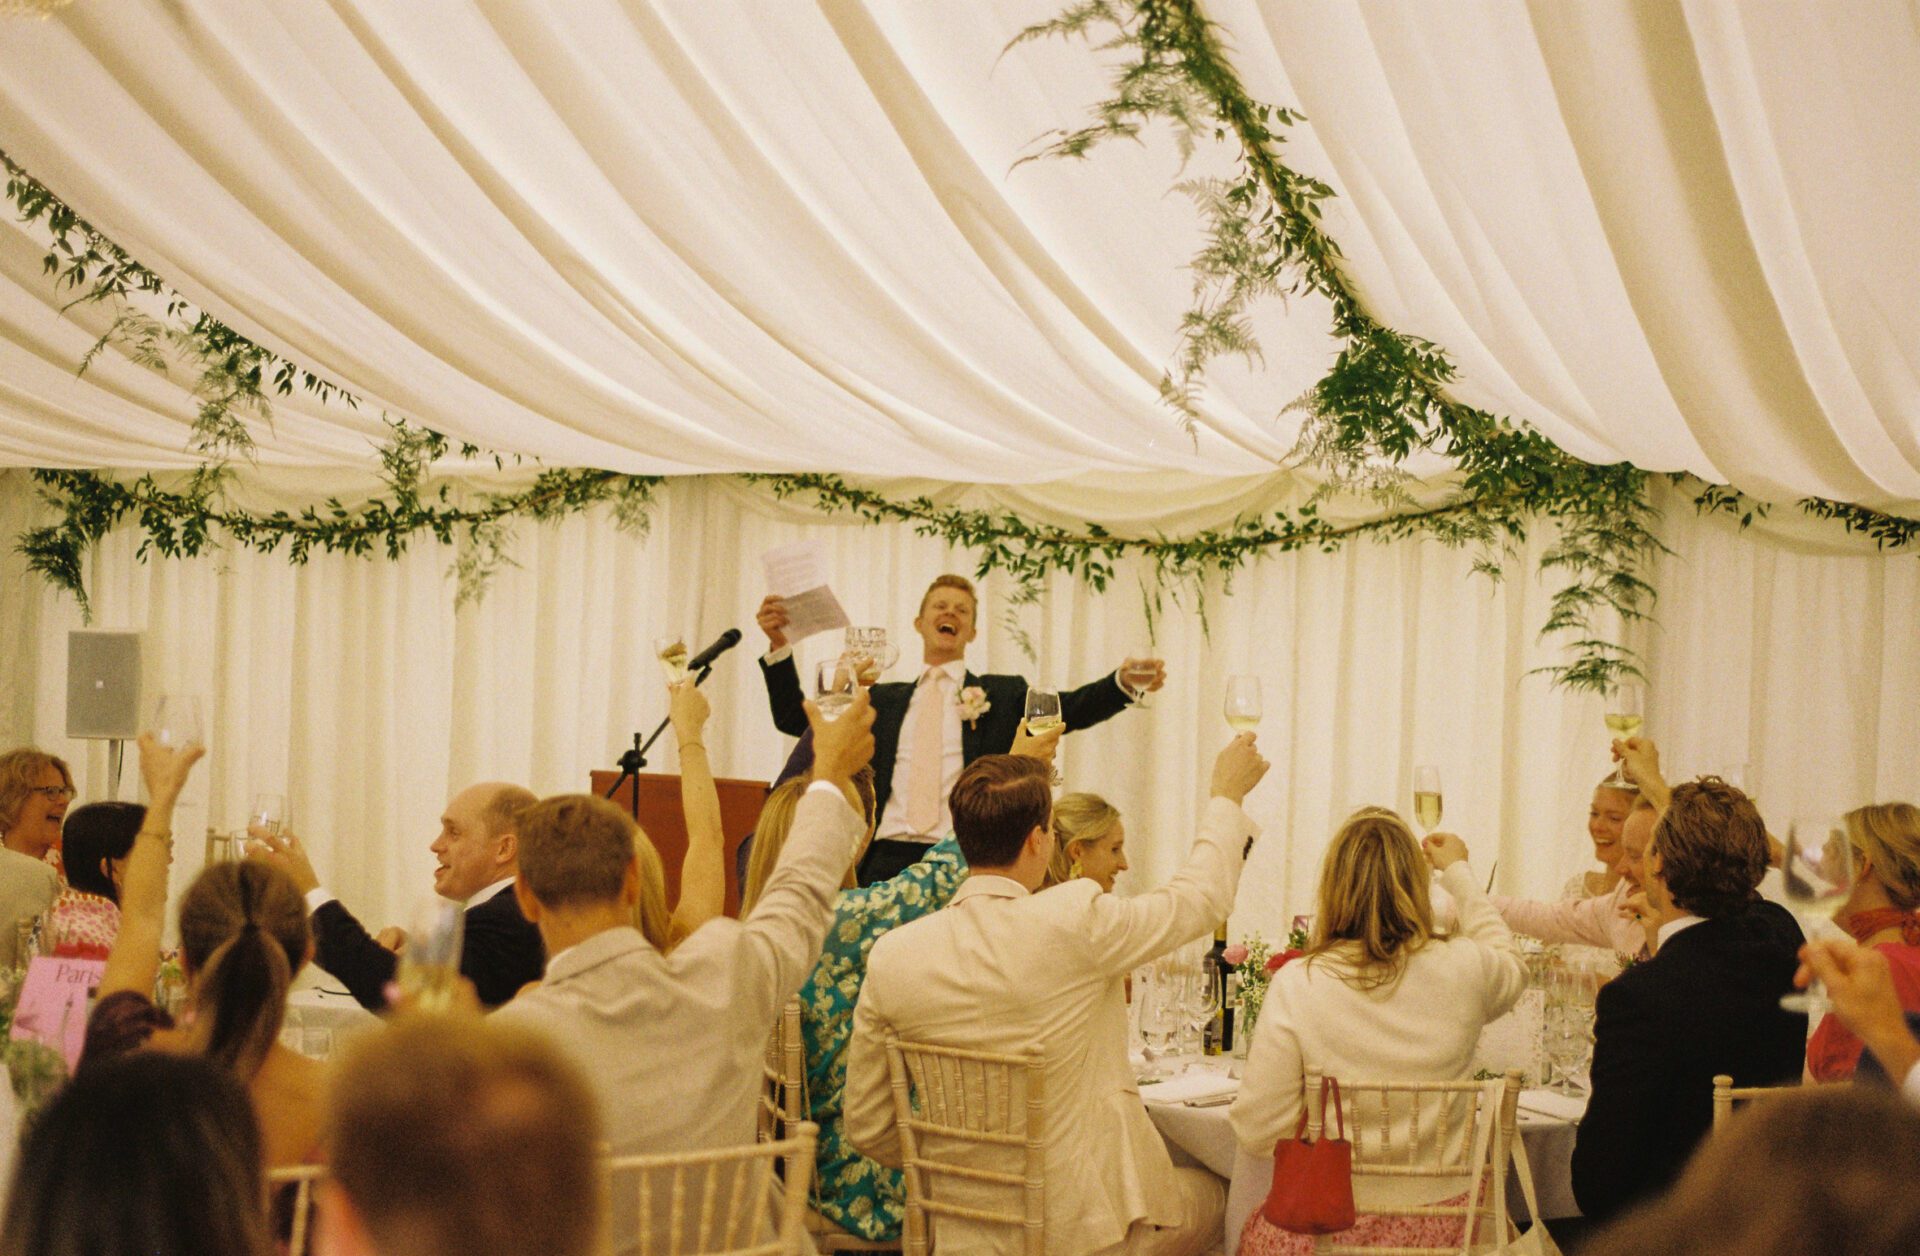 The groom gives a wedding speech at Brickwall House